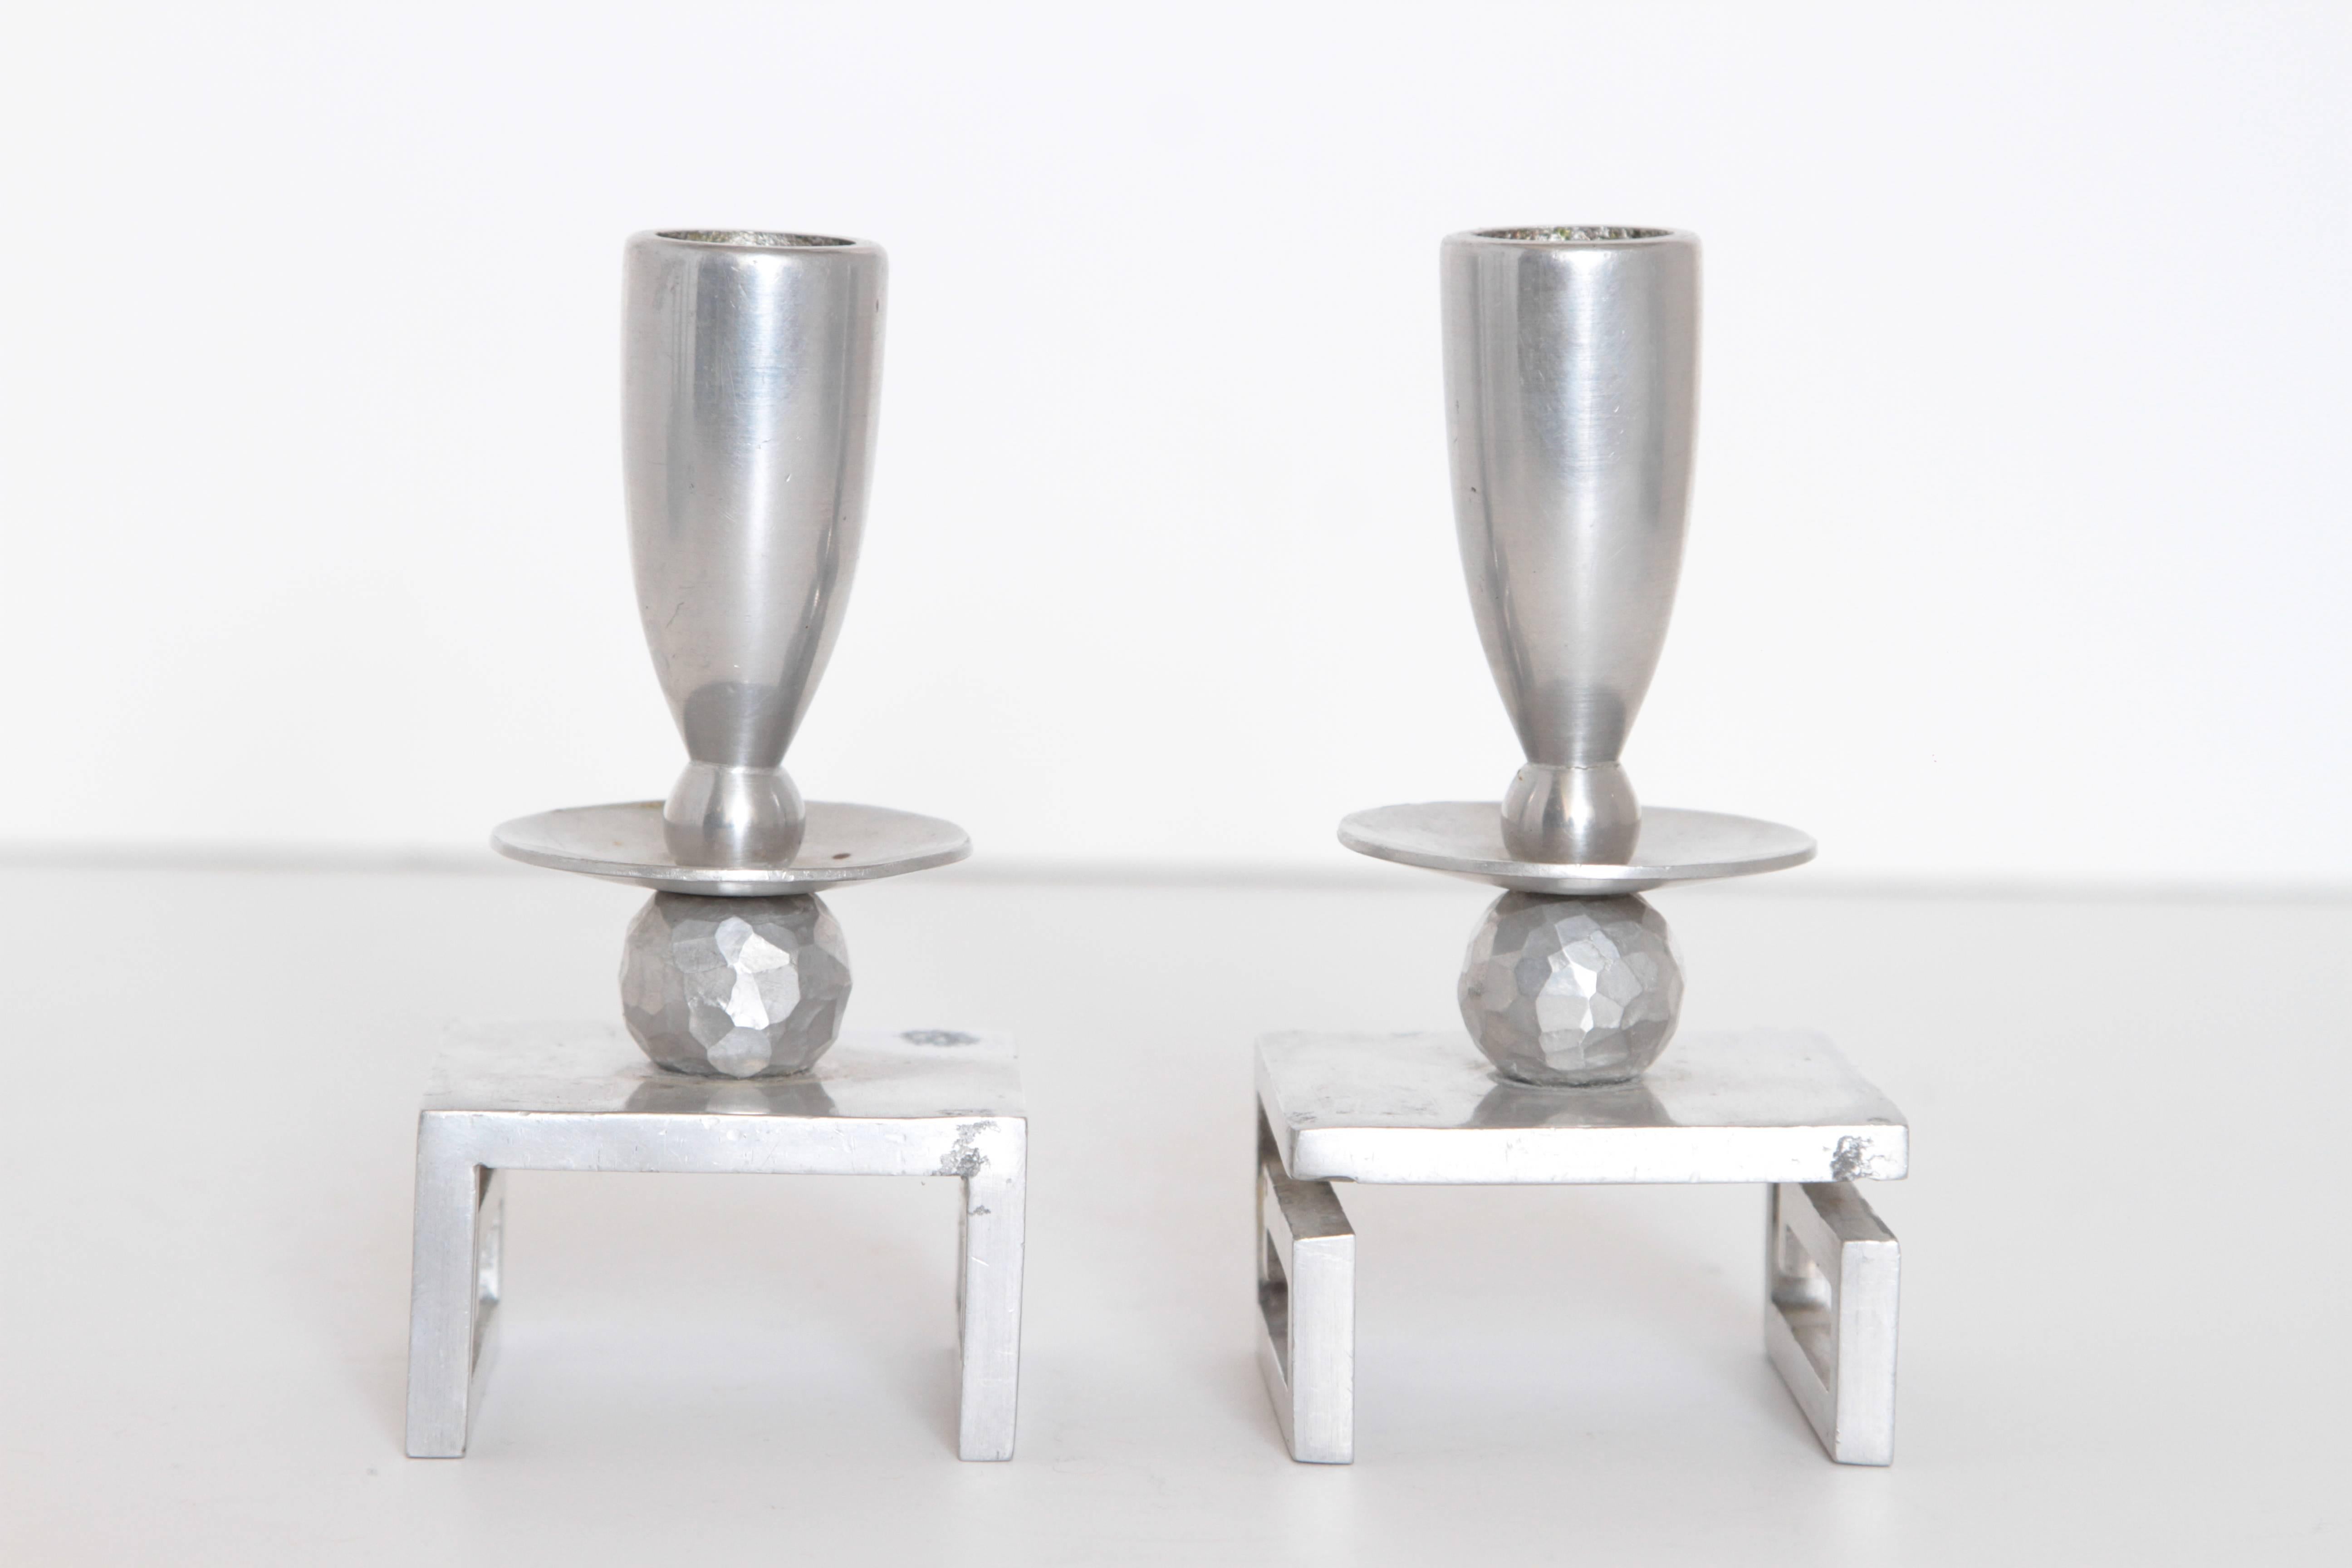 Mid-20th Century Machine Age Hand-Wrought Aluminium Palmer Smith Candlestick Holders, Two Pairs For Sale